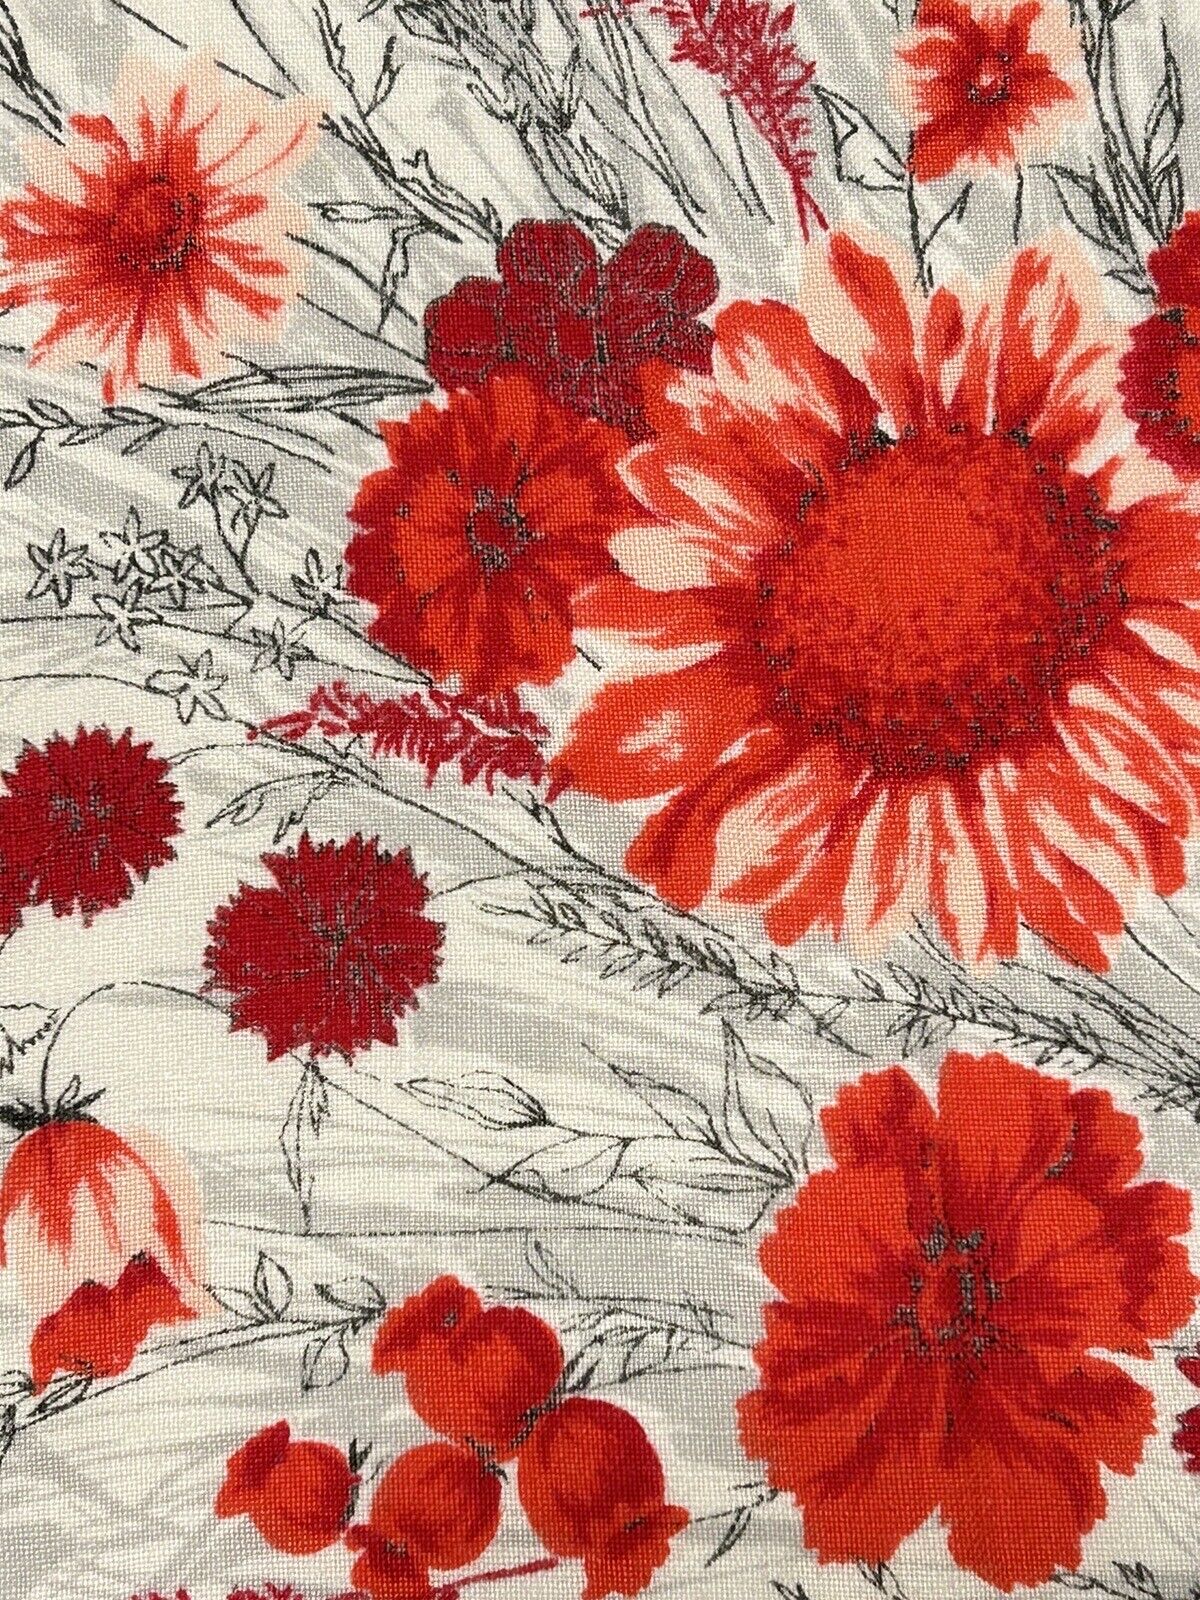 Vintage 1950-60s Linen Printed Tablecloth 48x48 Red Flowers